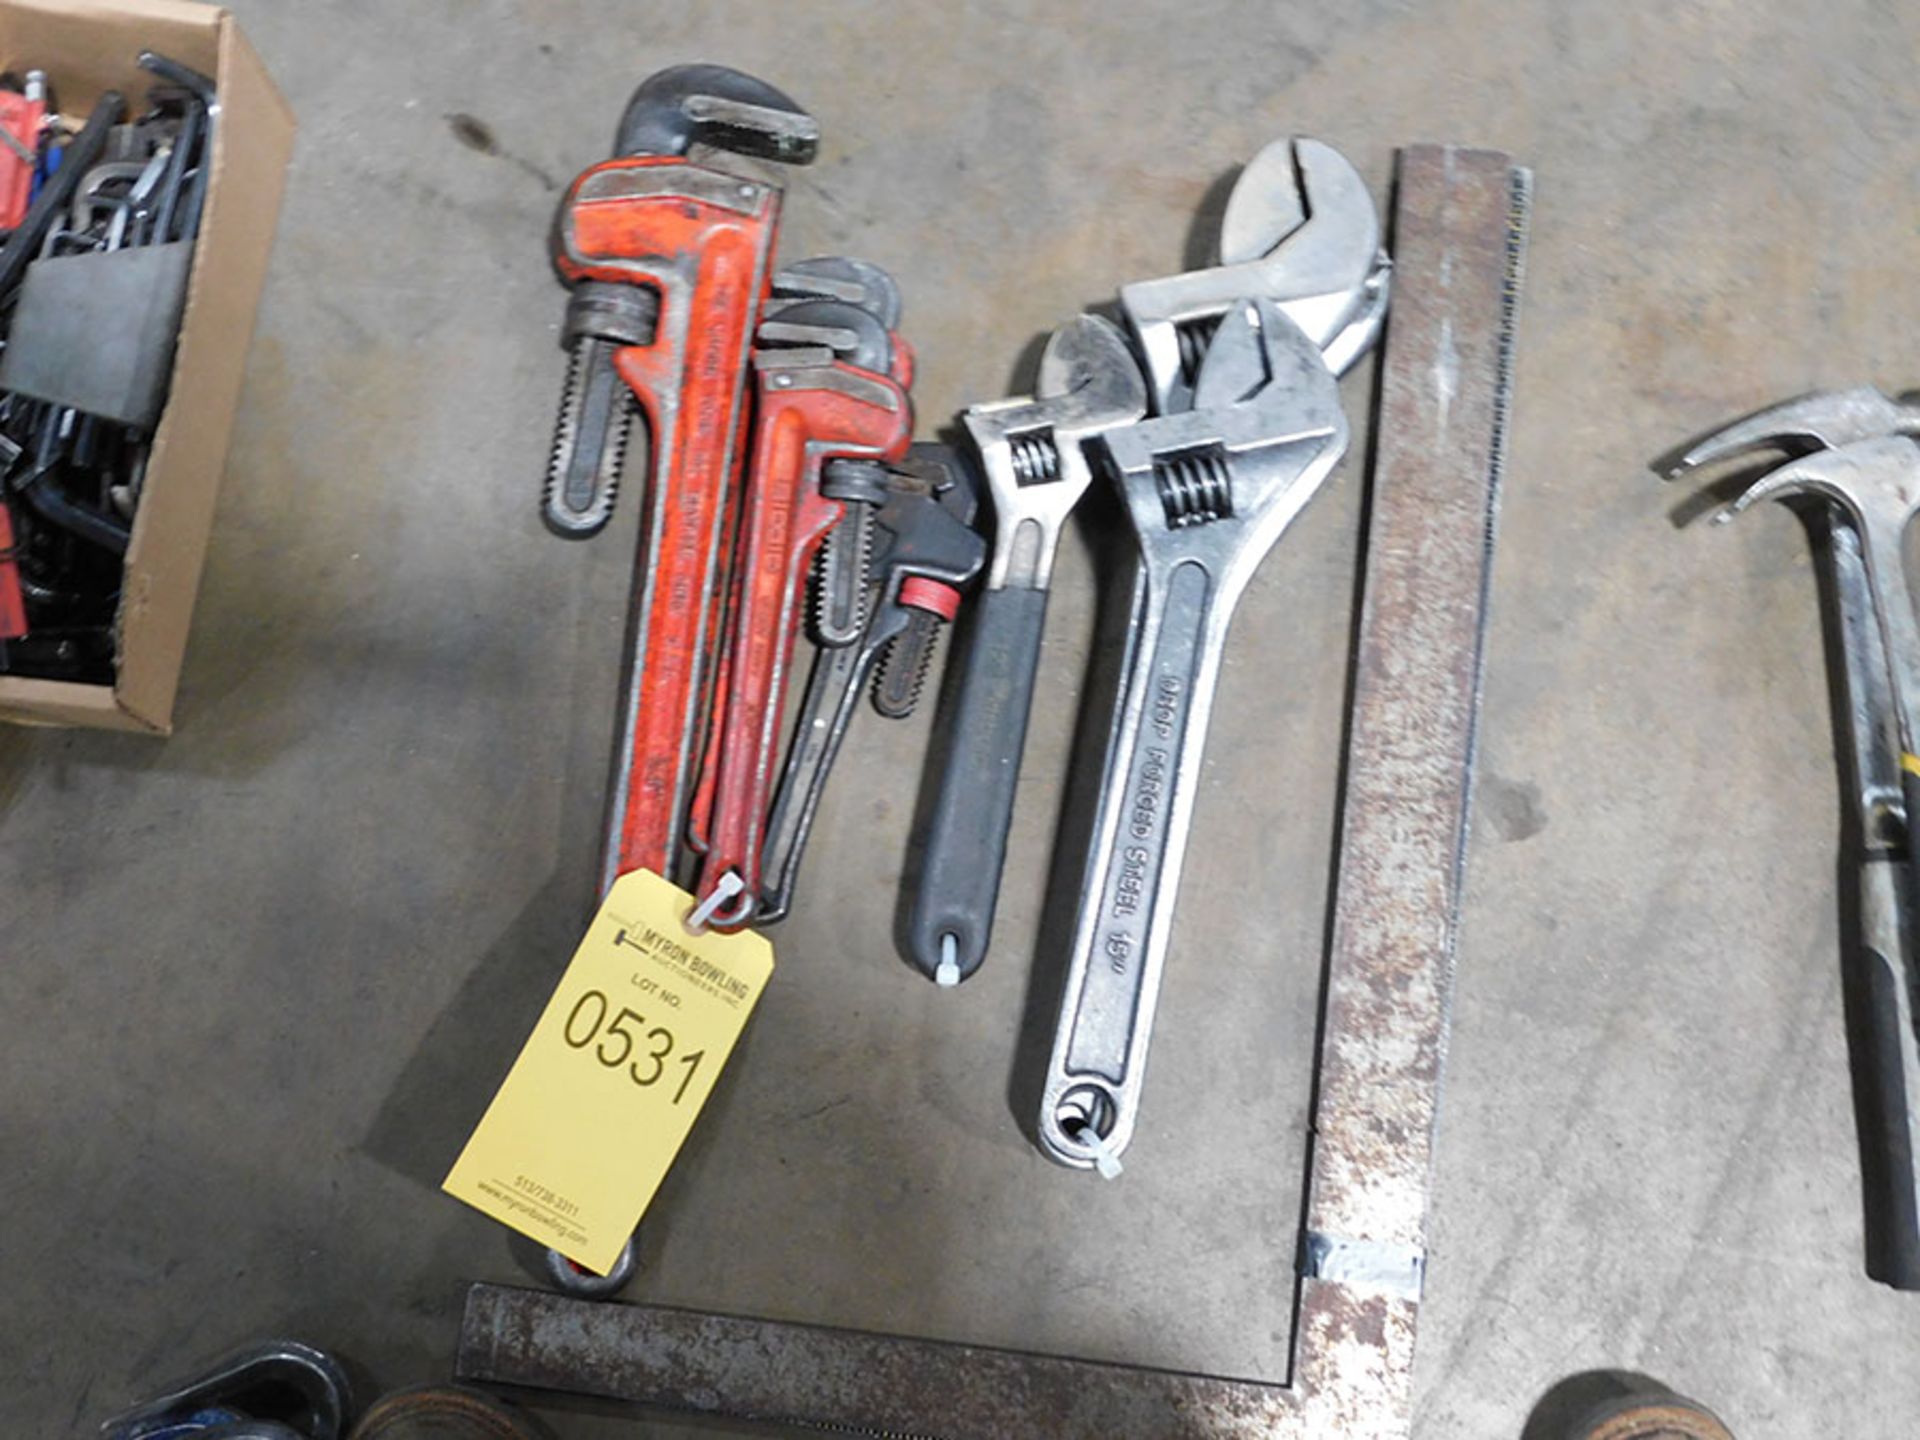 LOT OF PIPE WRENCHES, ADJUSTABLE WRENCHES, AND (2) FRAMING SQUARES